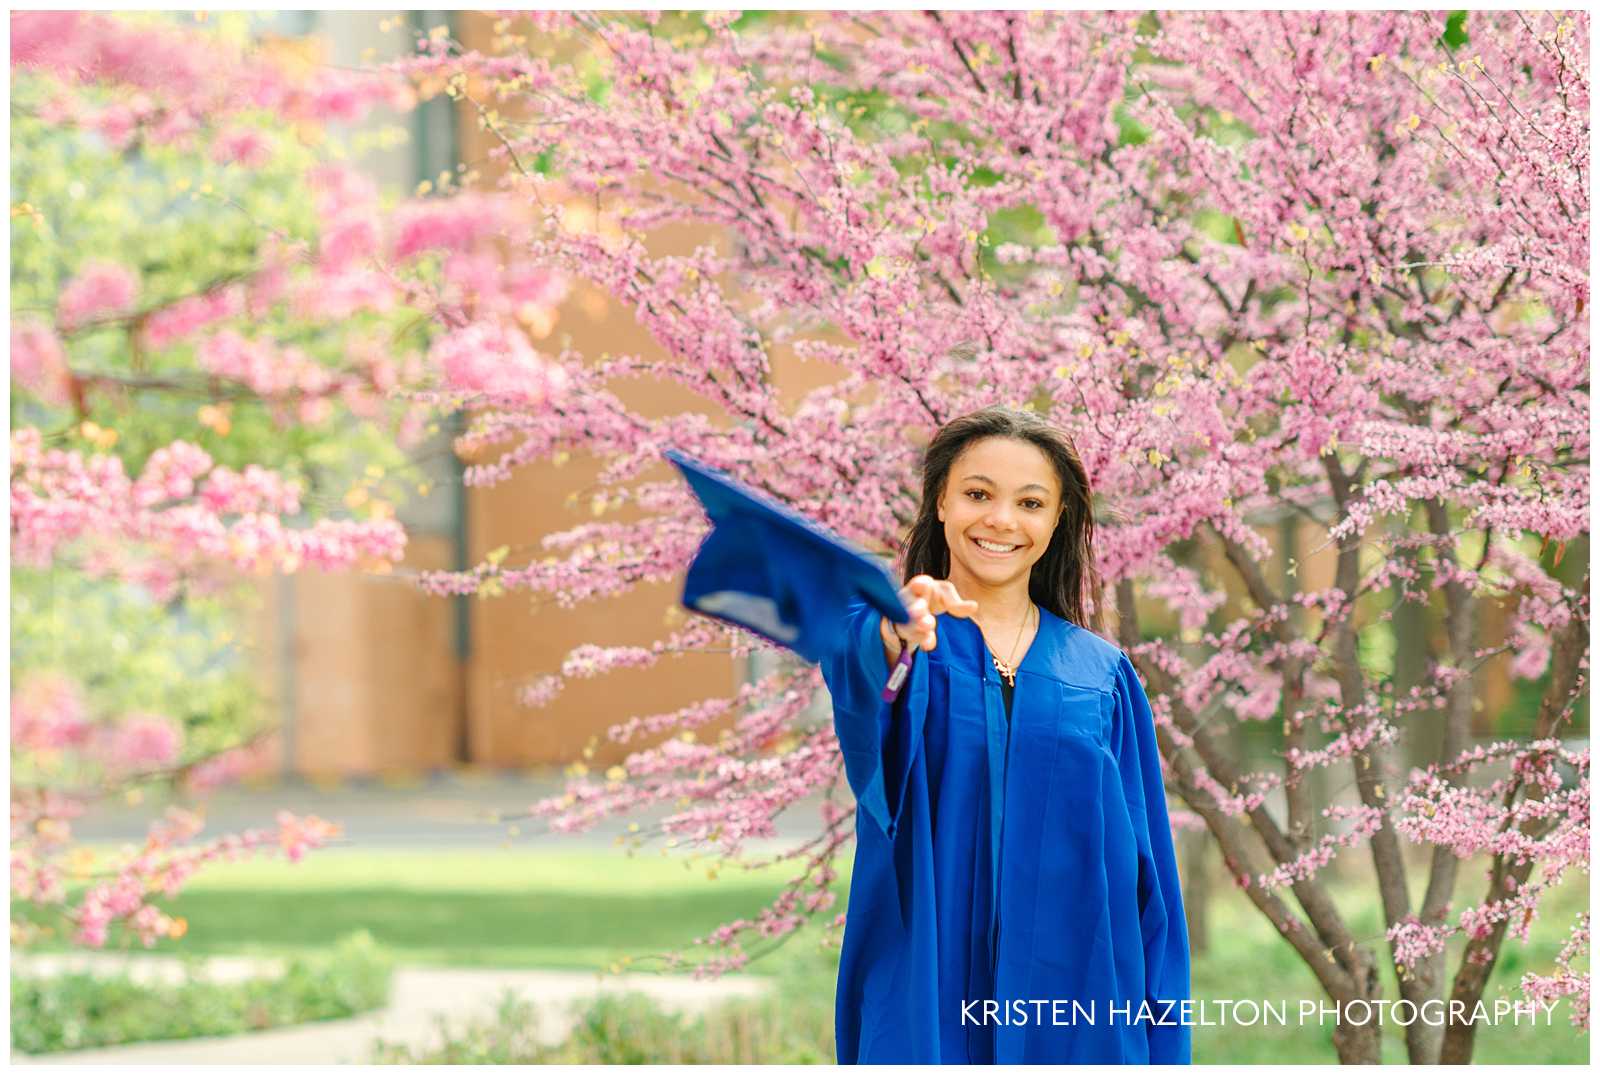 High school graduate in a blue robe throwing her cap towards you